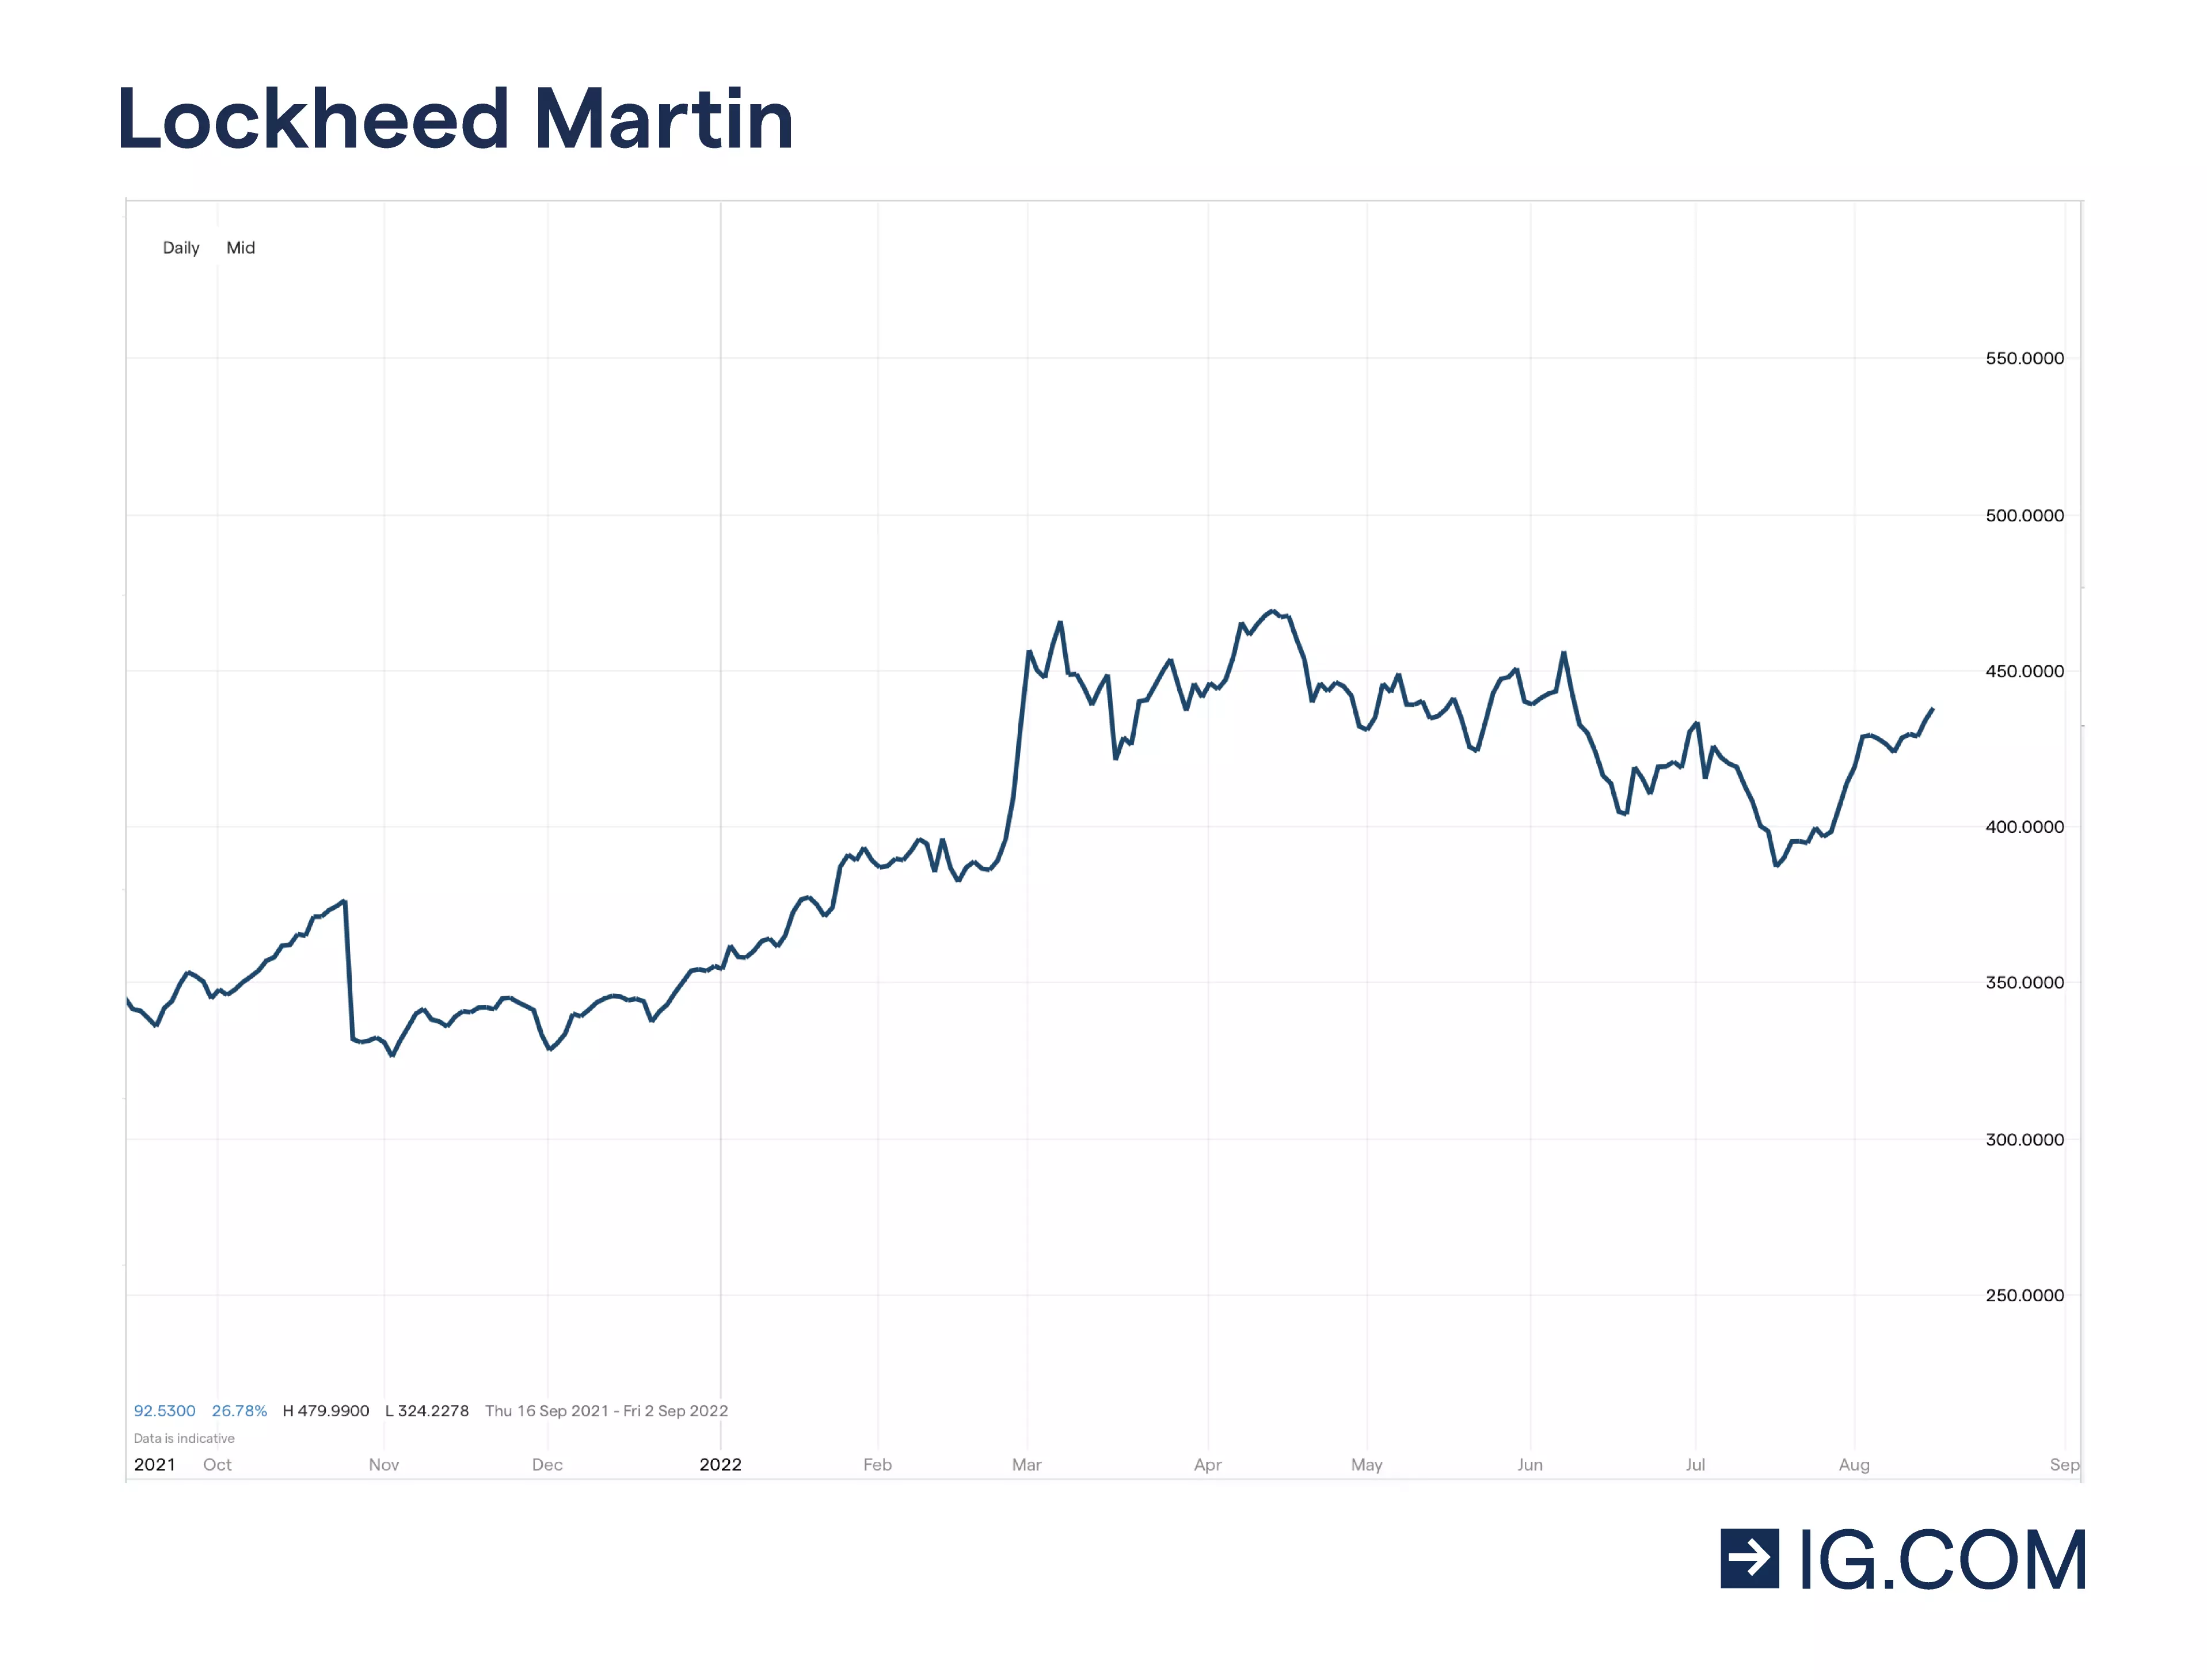 Graph displays different price levels of Lockheed Martin stock over a year timeline reaching highs and lows including a low 325.50 in November 2021 before peaking at 475.50 in April 2022, the current share price is 432.30 in May 2022